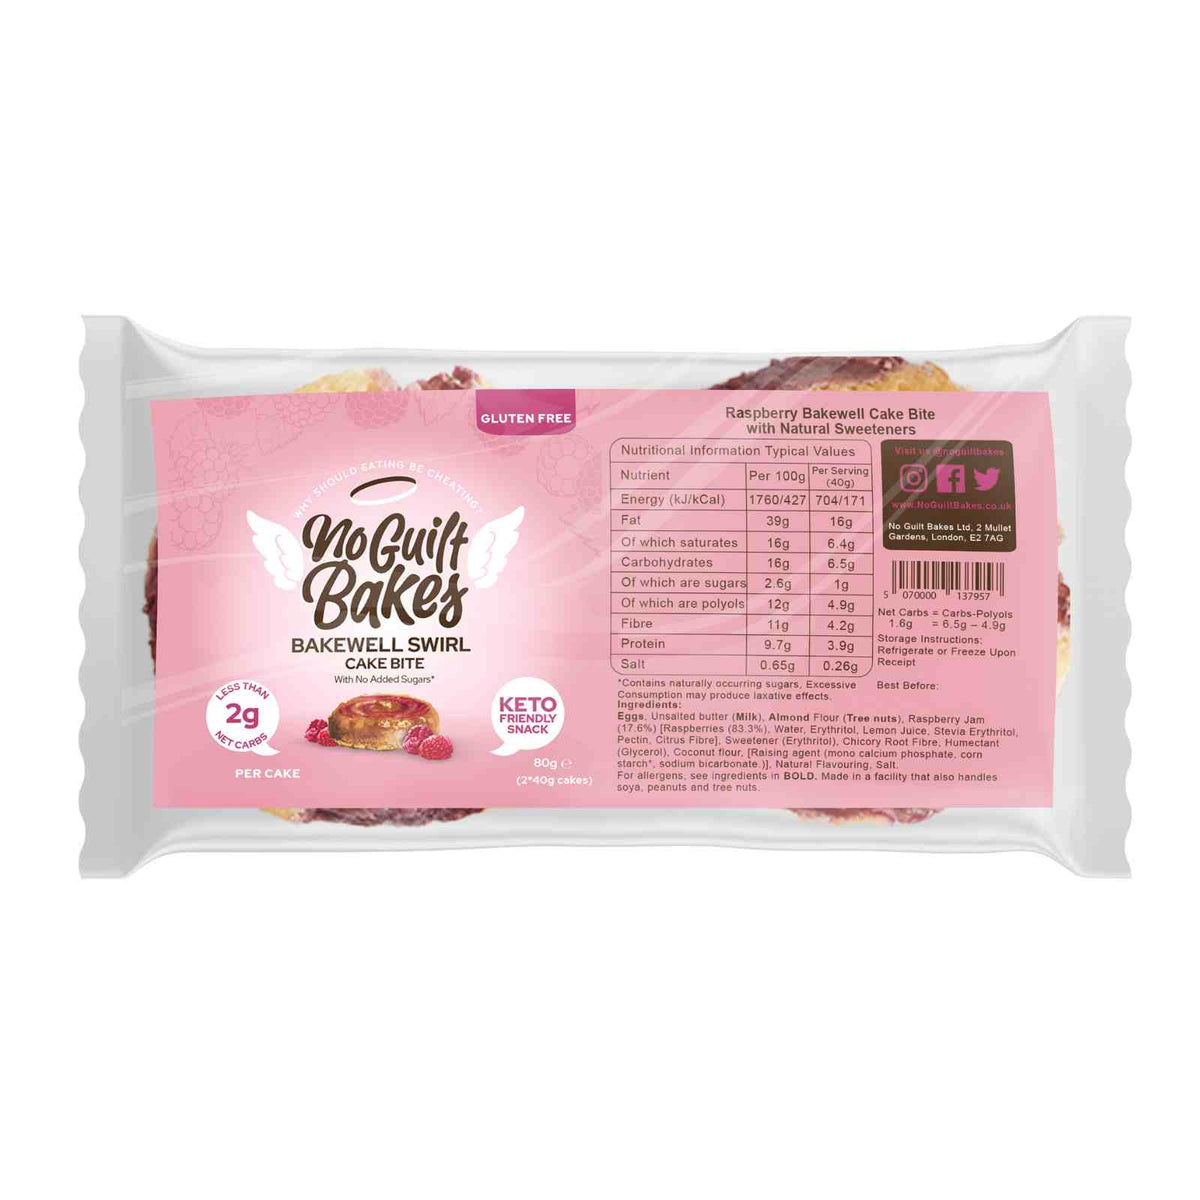 Indulge in No Guilt Bakes&#39;s package of healthy Raspberry Bakewell Swirl Keto Cake Bites, perfect for those on a ketogenic diet. The treats are set against a pink background for a delightful presentation.